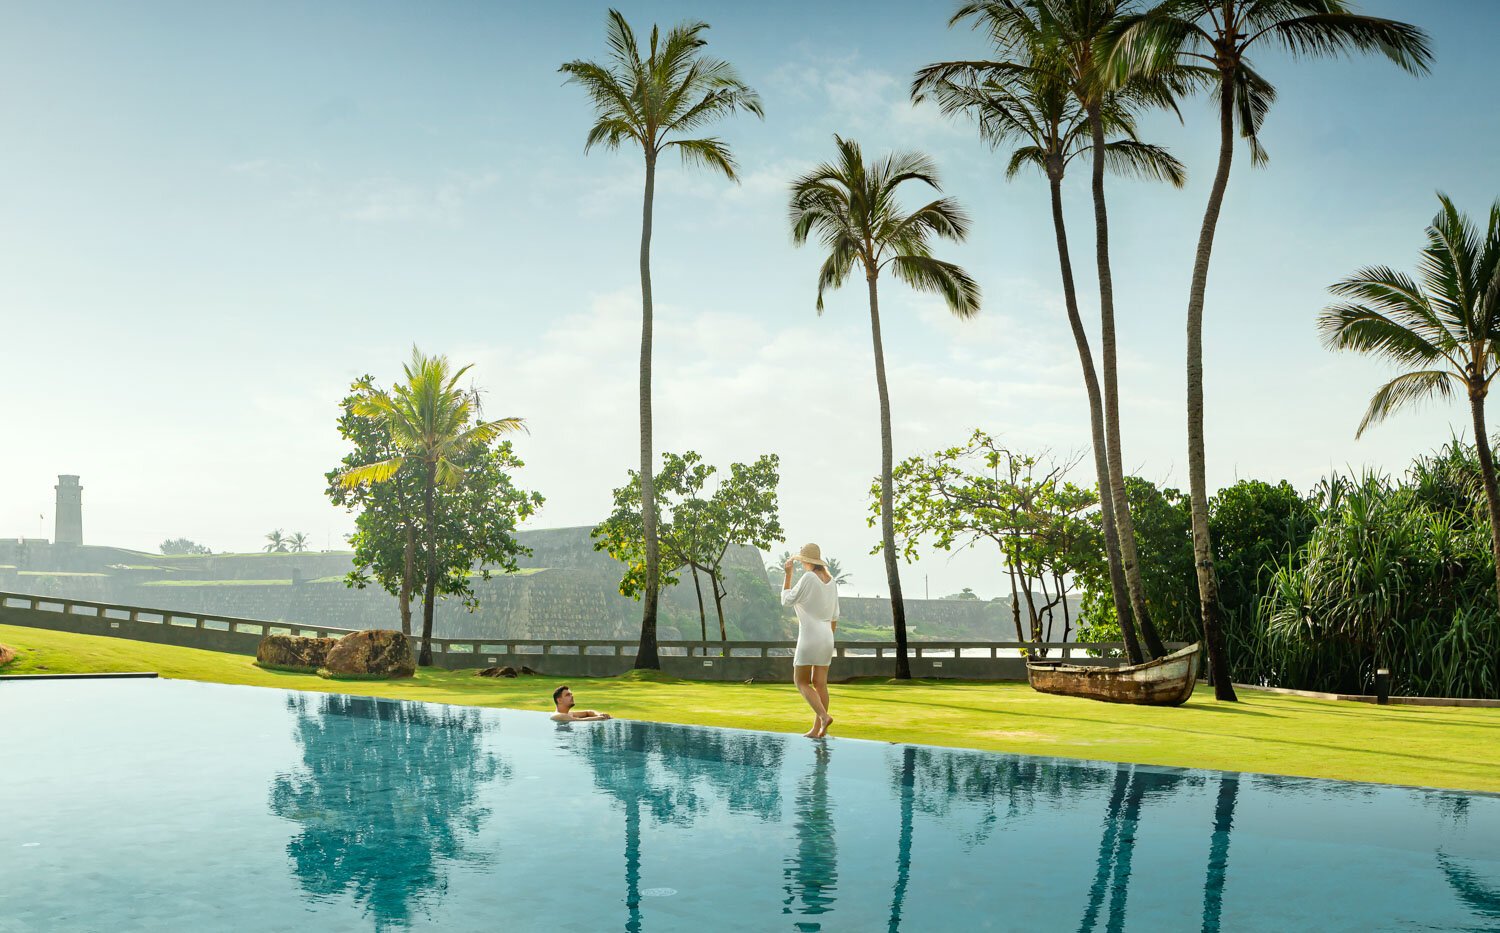 Exterior photography of the pool Le grand galle in Sri Lanka - Pool with view and couple_JiriLizler_Architecture Photographer.JPG